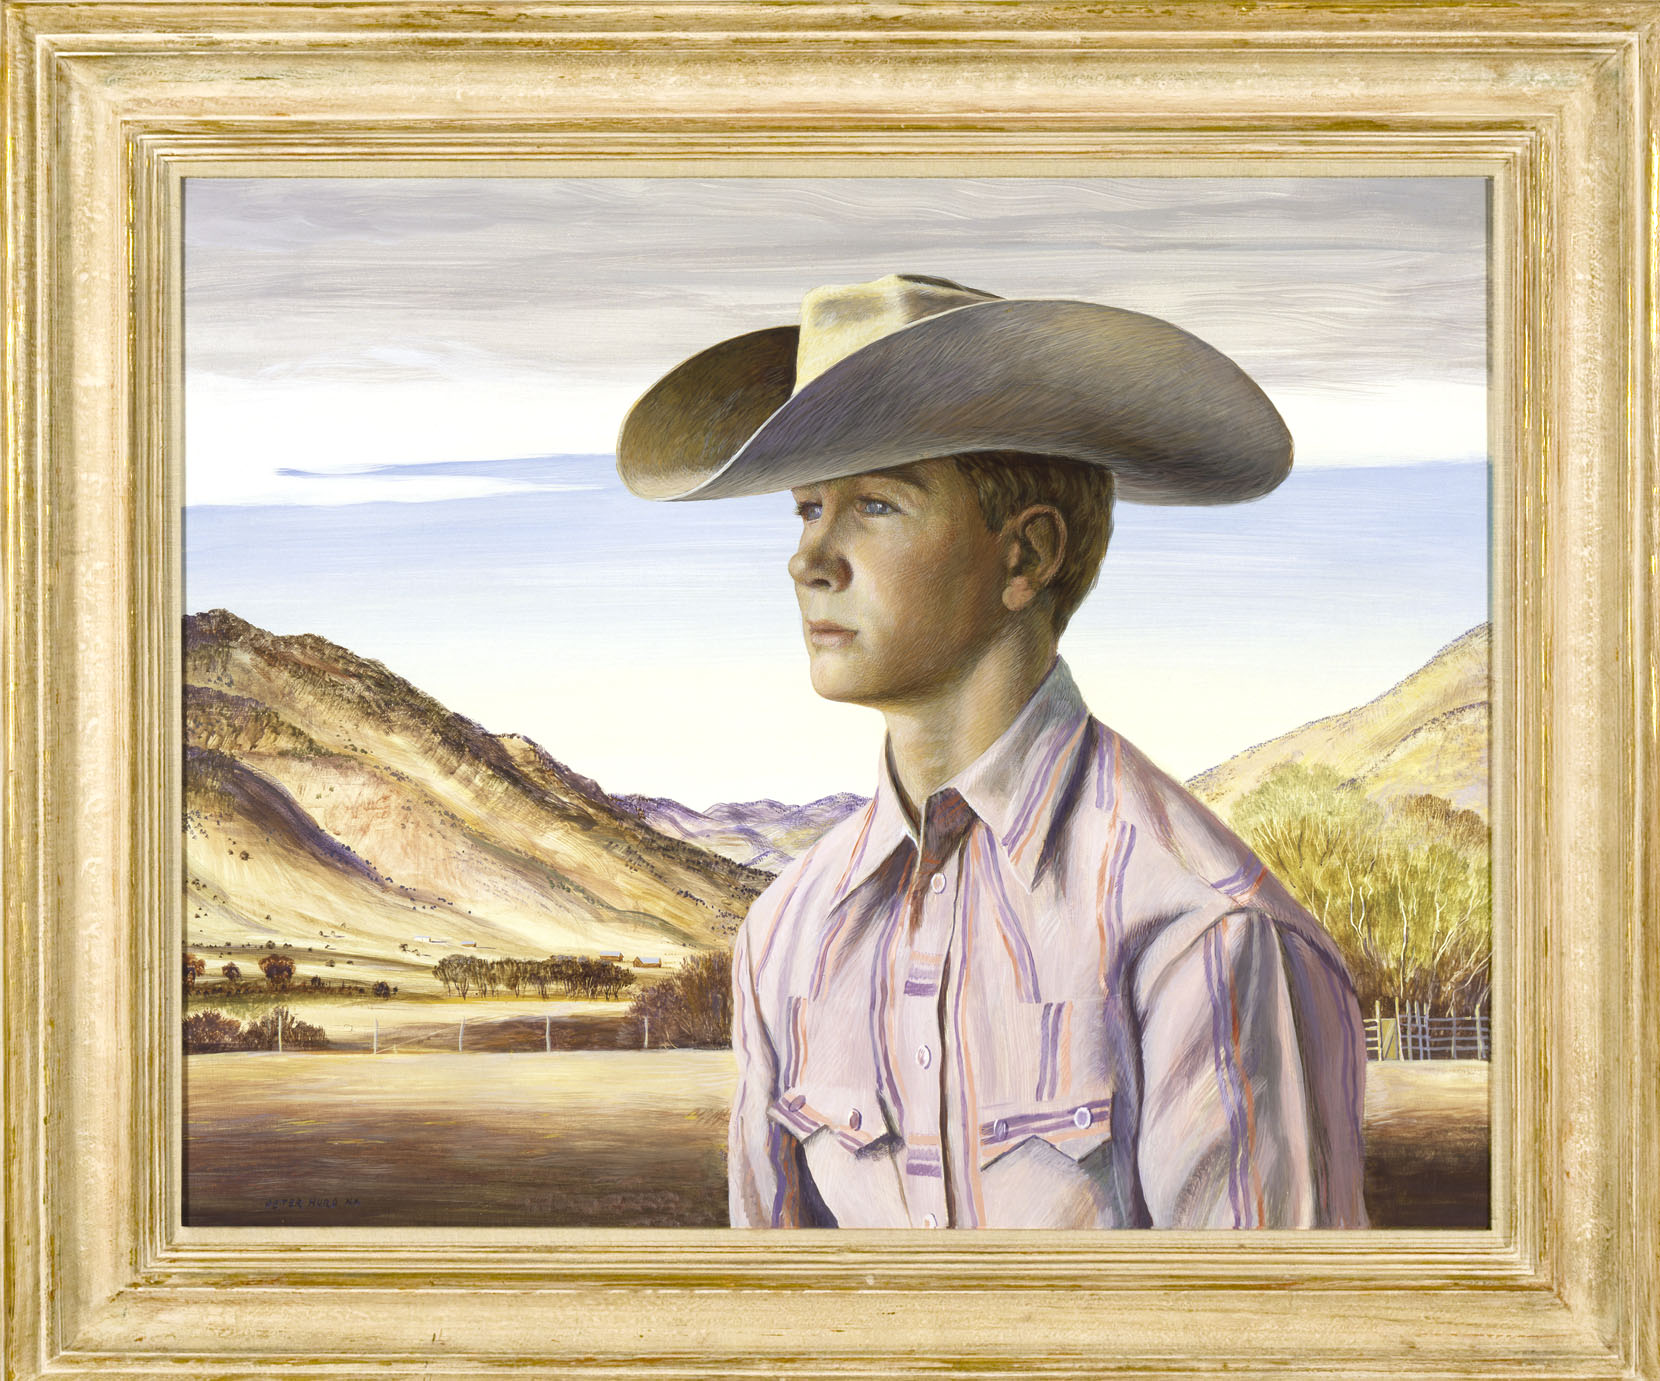 Young man in cowboy hat, purple shirt with orange stripes, desert mountains in background